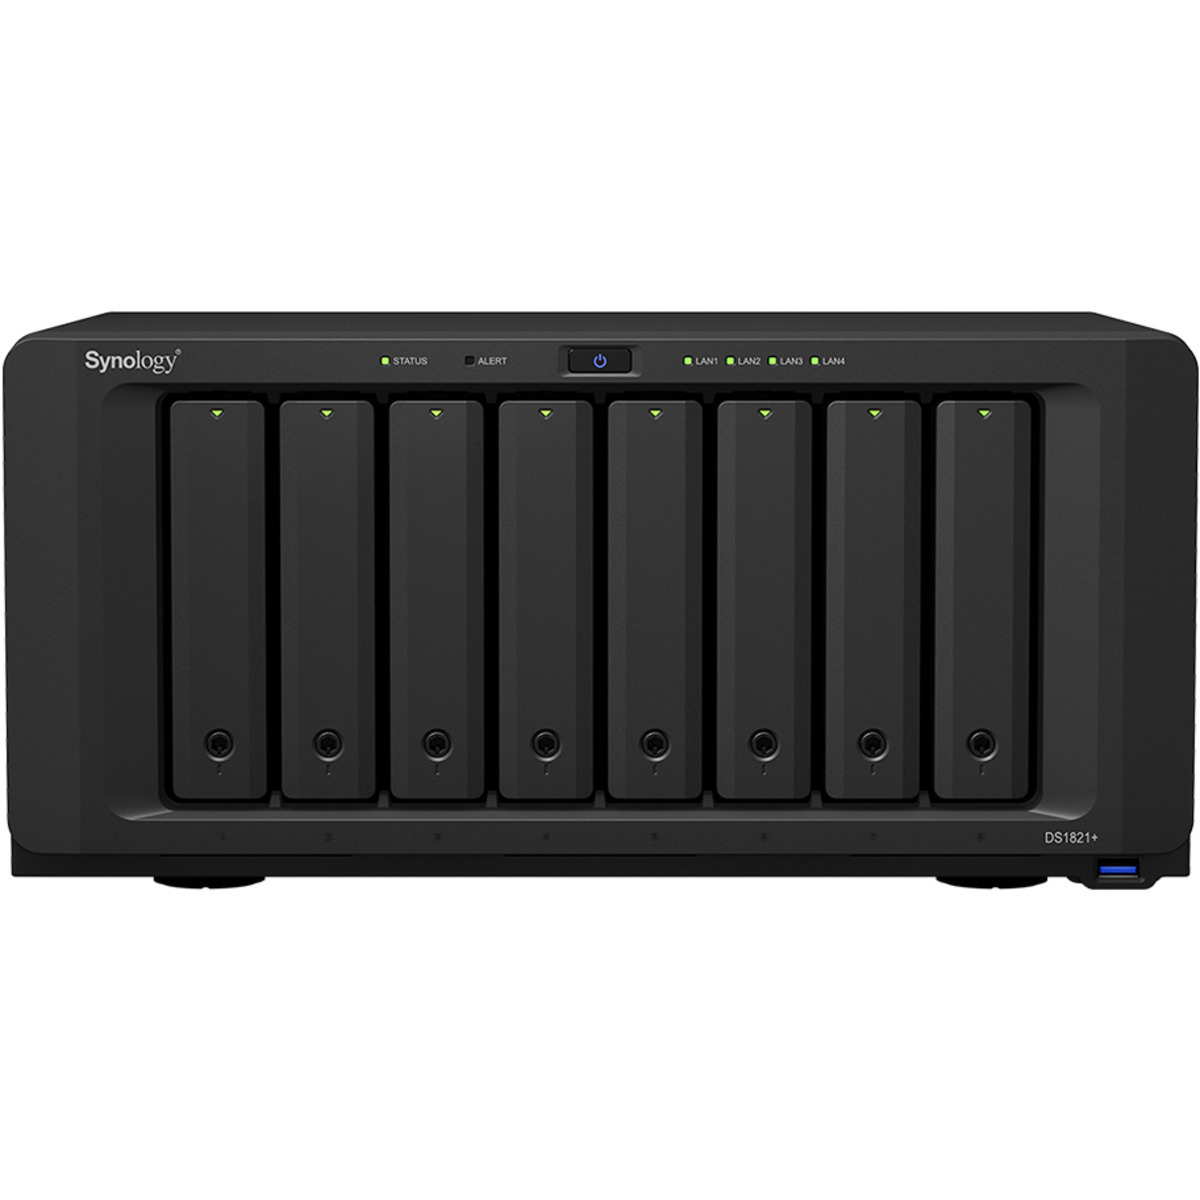 Synology DiskStation DS1821+ 64tb 8-Bay Desktop Multimedia / Power User / Business NAS - Network Attached Storage Device 8x8tb Seagate EXOS 7E10 ST8000NM017B 3.5 7200rpm SATA 6Gb/s HDD ENTERPRISE Class Drives Installed - Burn-In Tested - FREE RAM UPGRADE DiskStation DS1821+